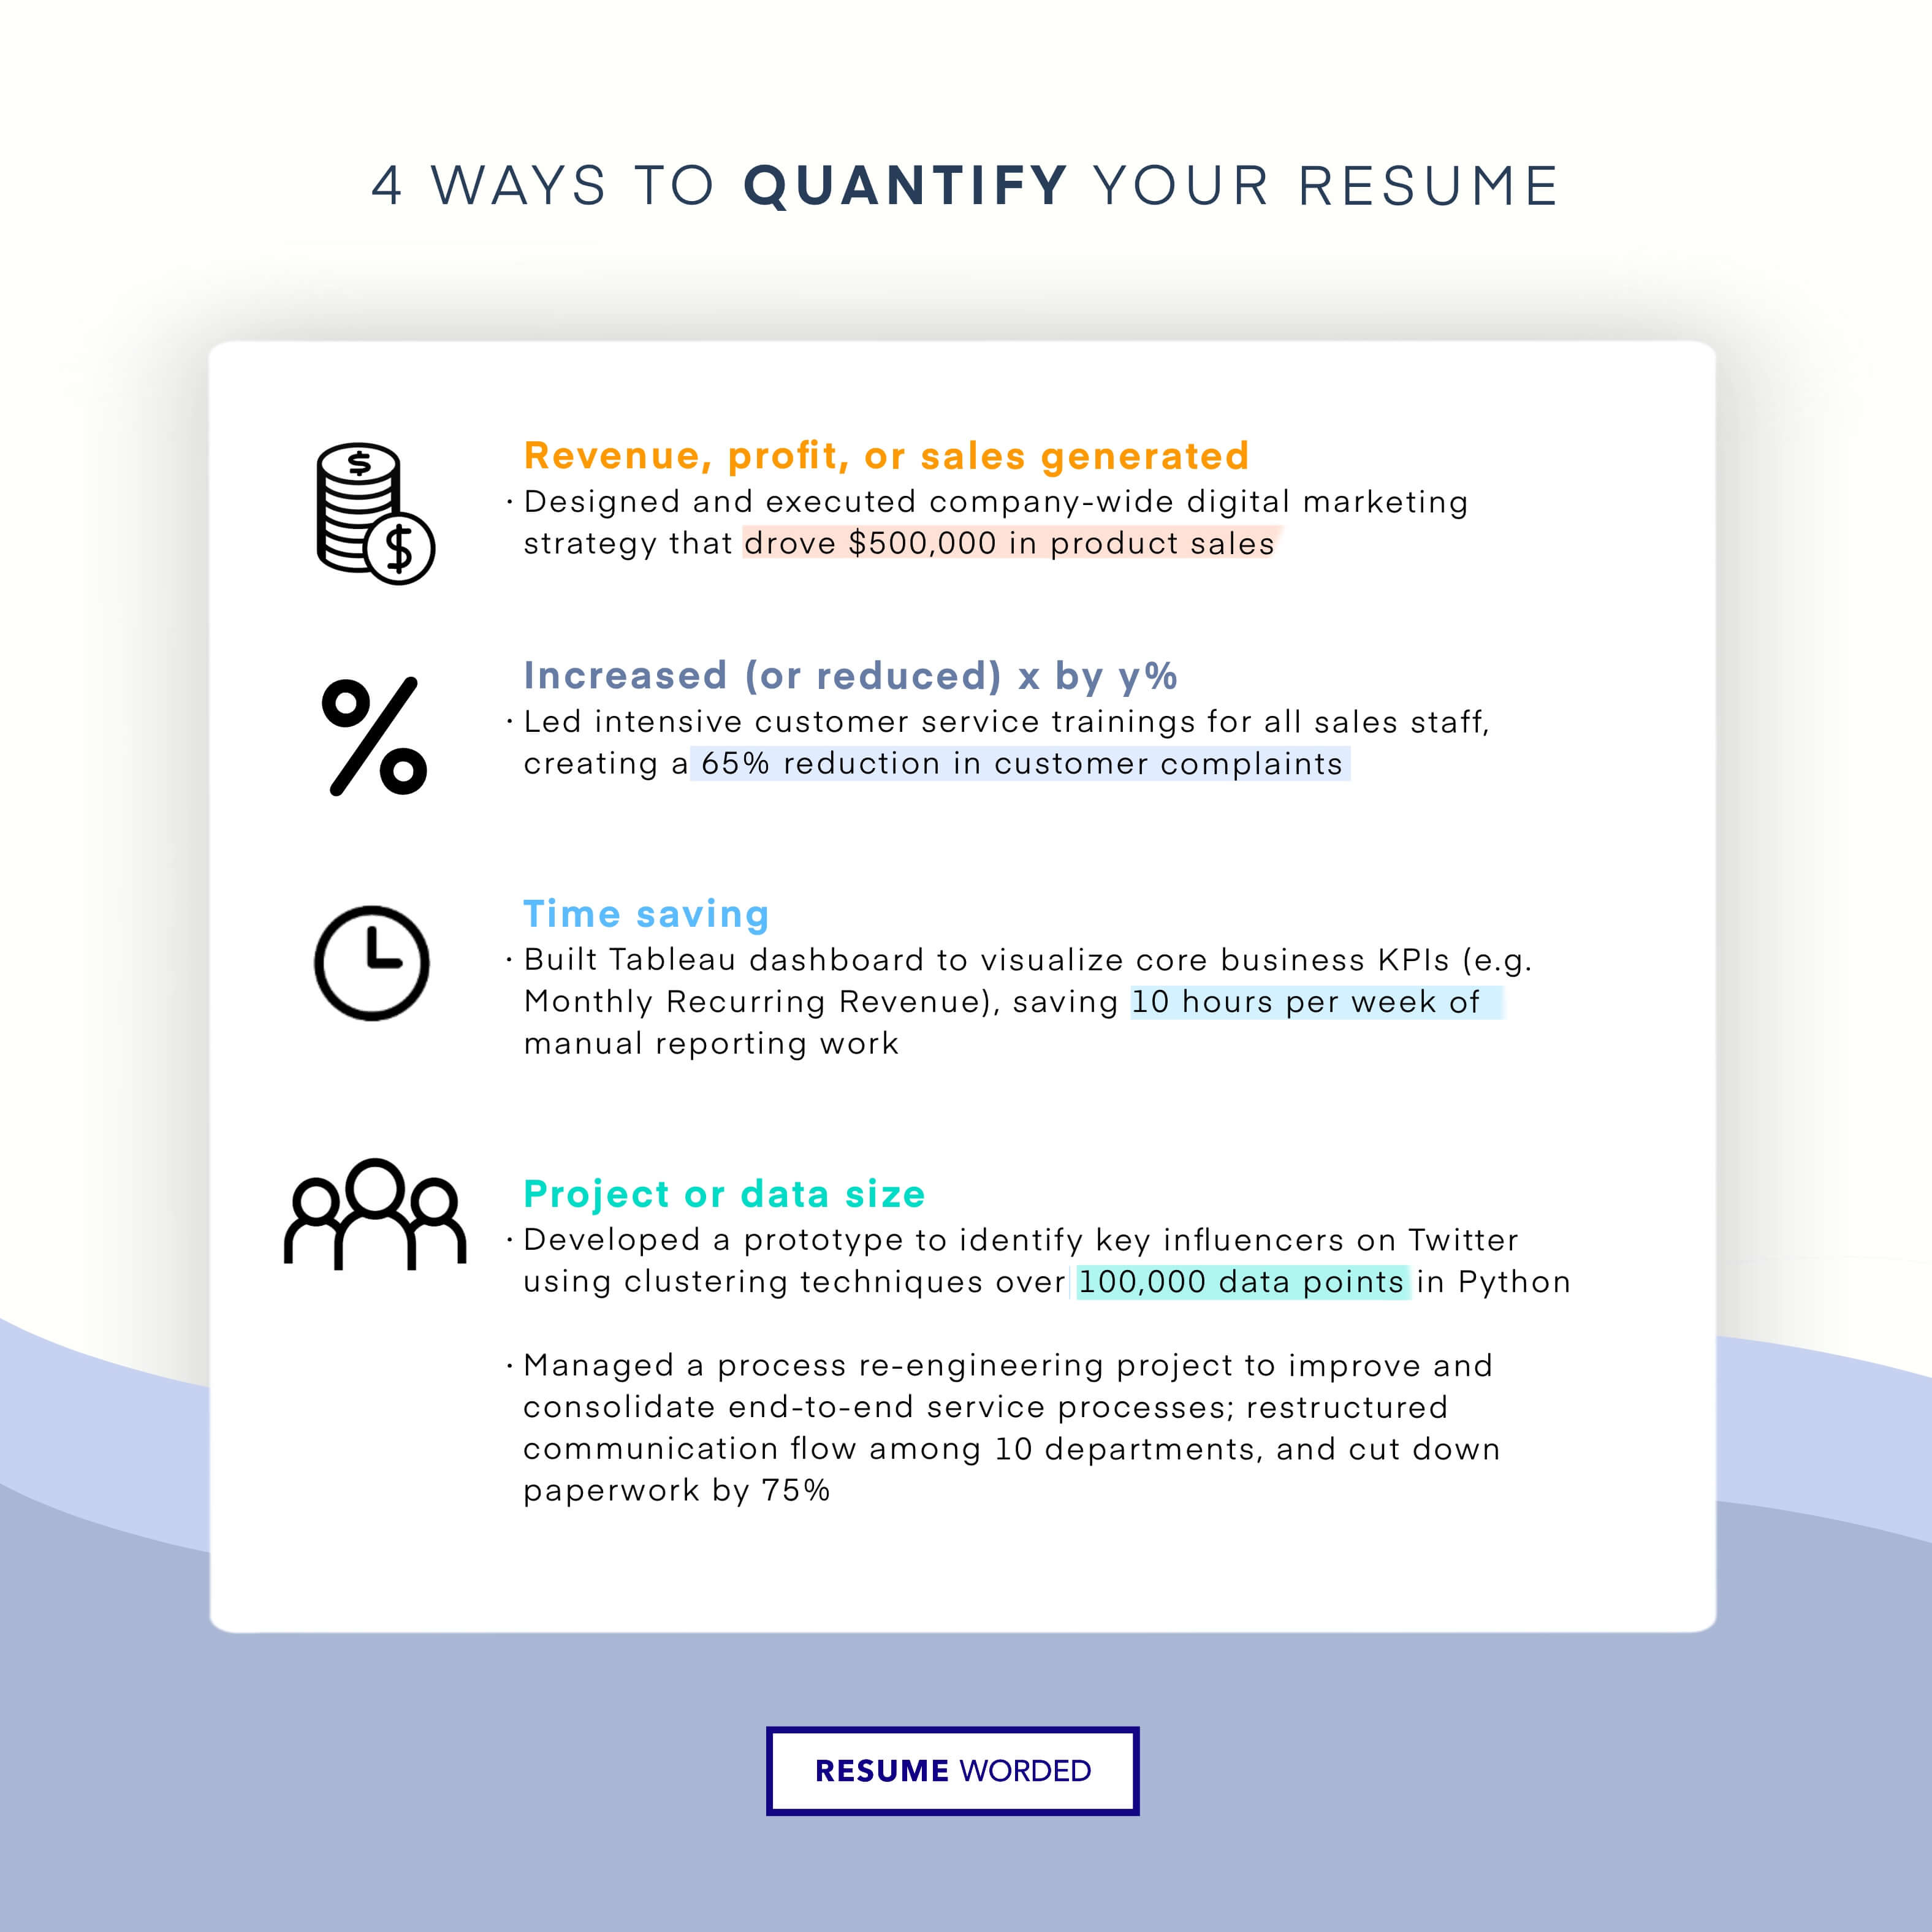 Quantify your workload capabilities. - Entry-Level Attorney Resume